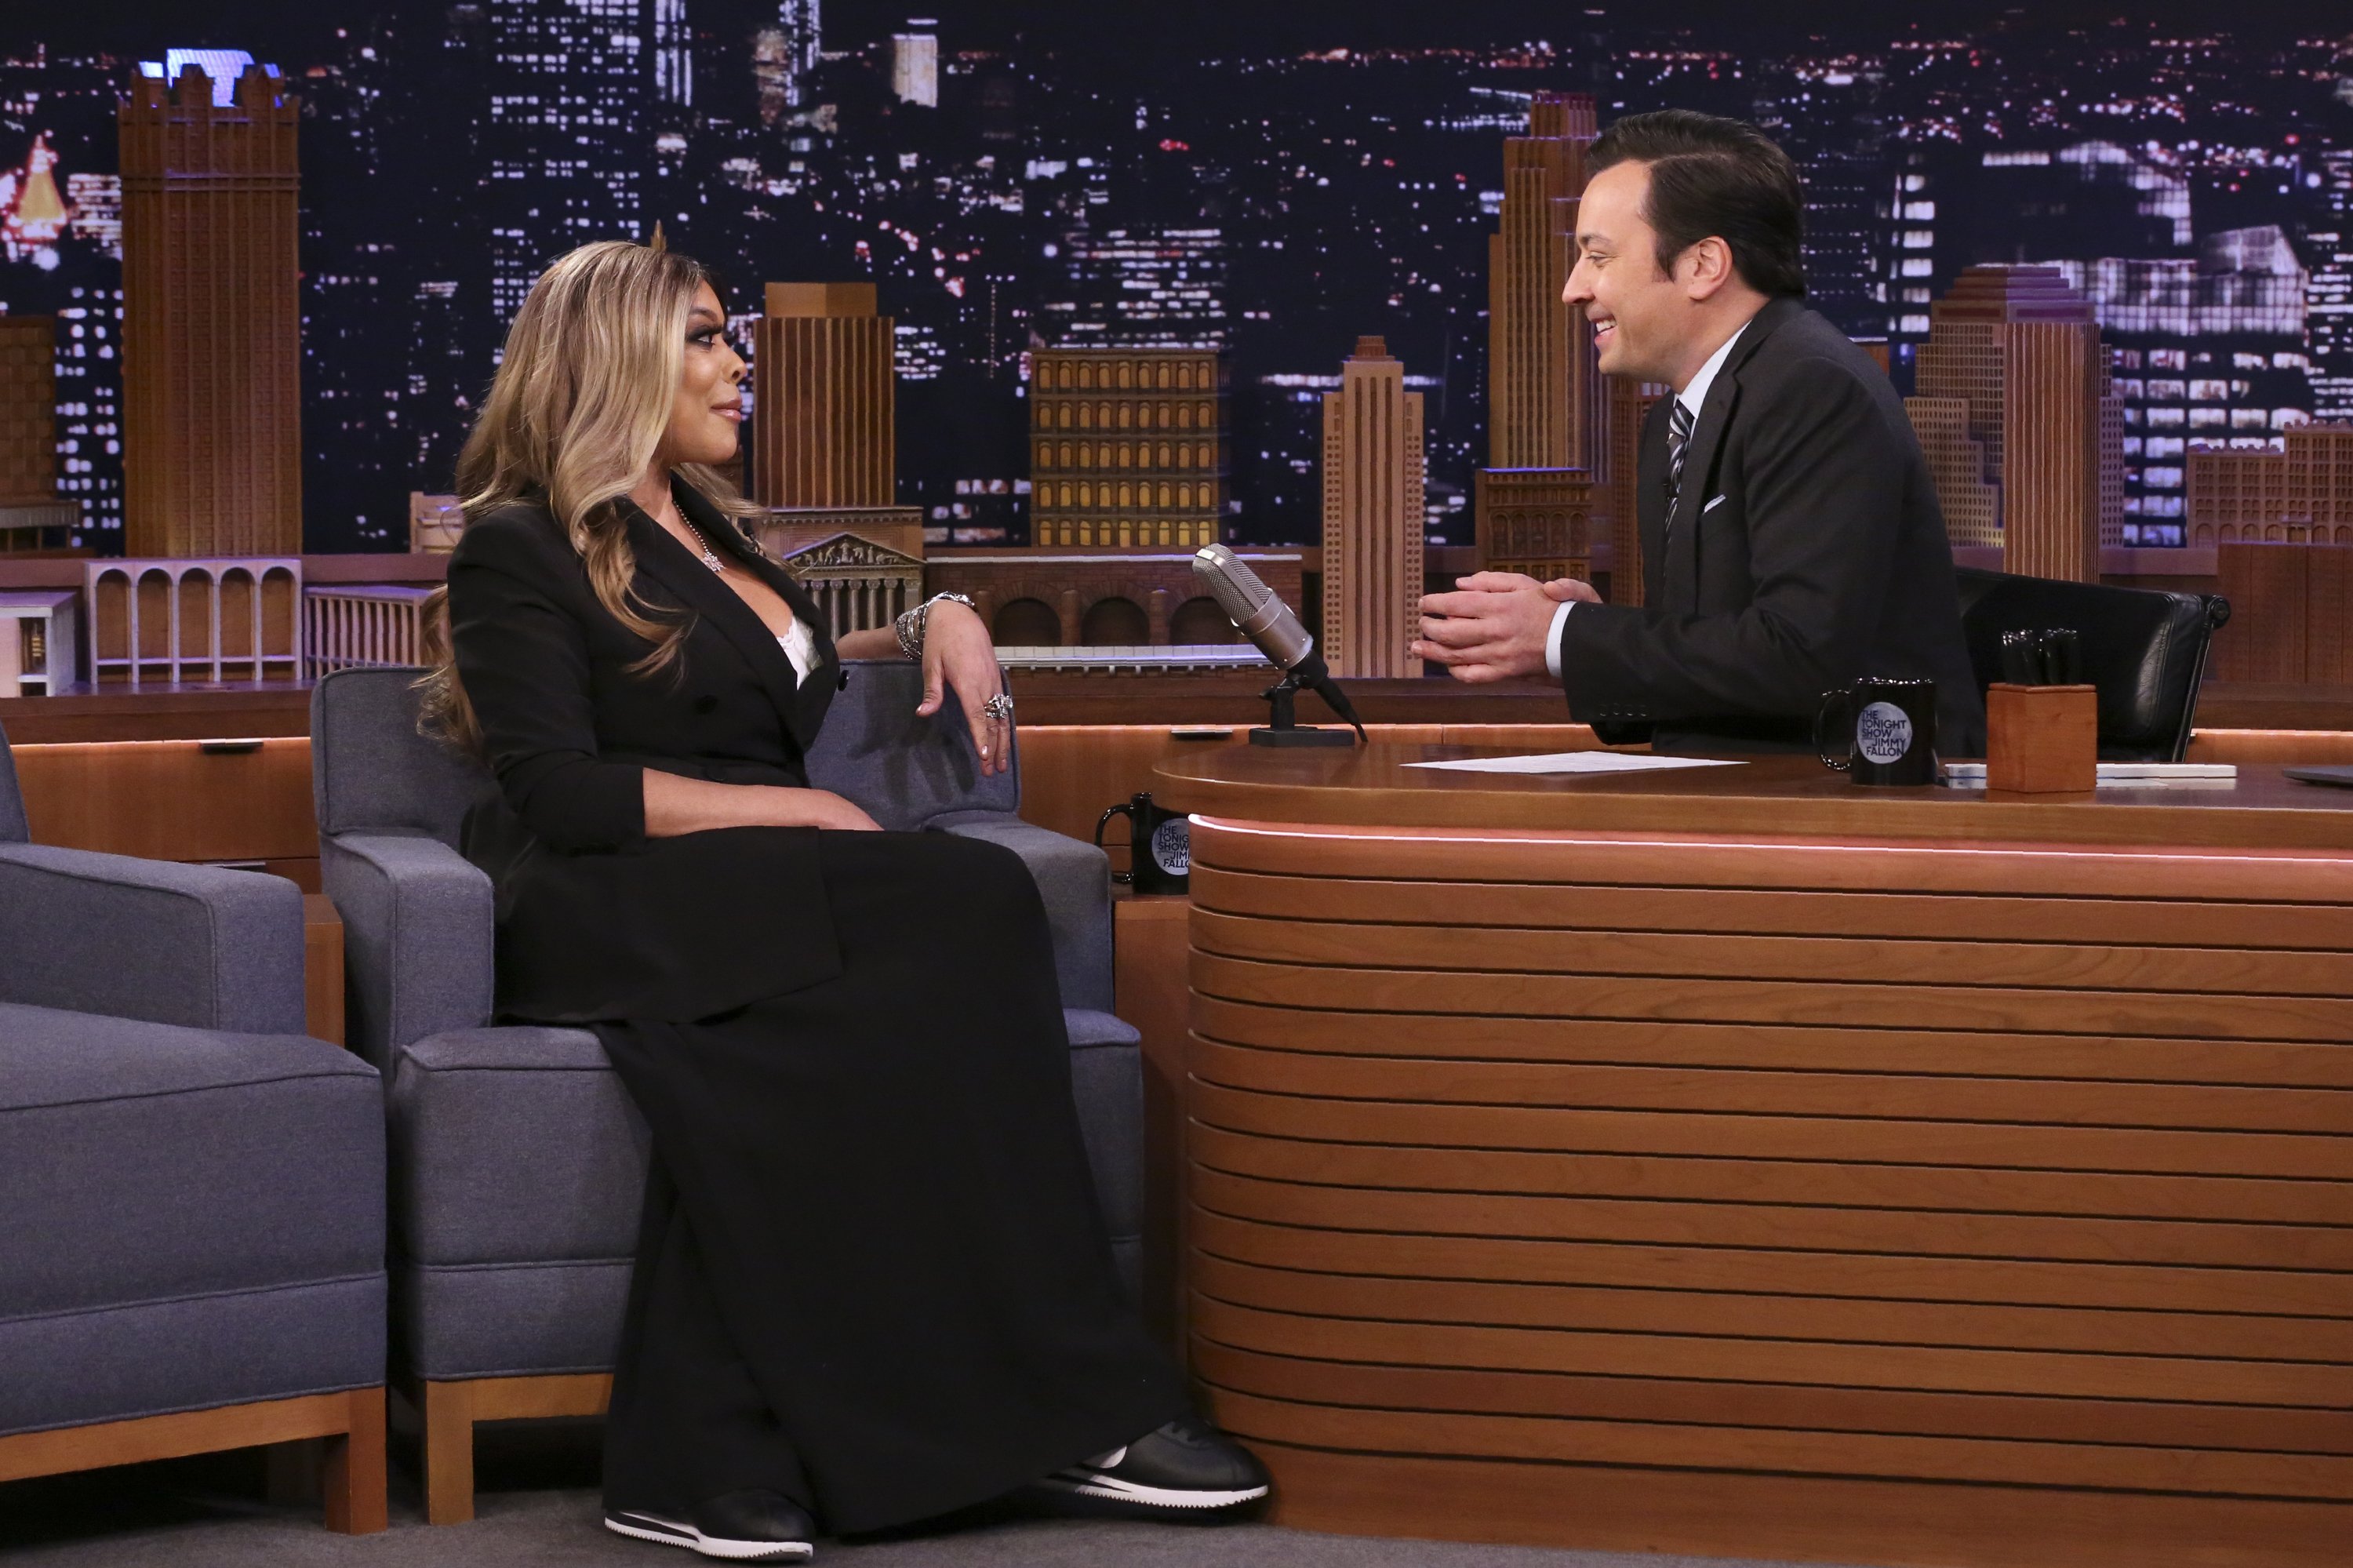 Wendy Williams during an interview with host Jimmy Fallon on "The Tonight Show Starring Jimmy Fallon" | Source: Getty Images